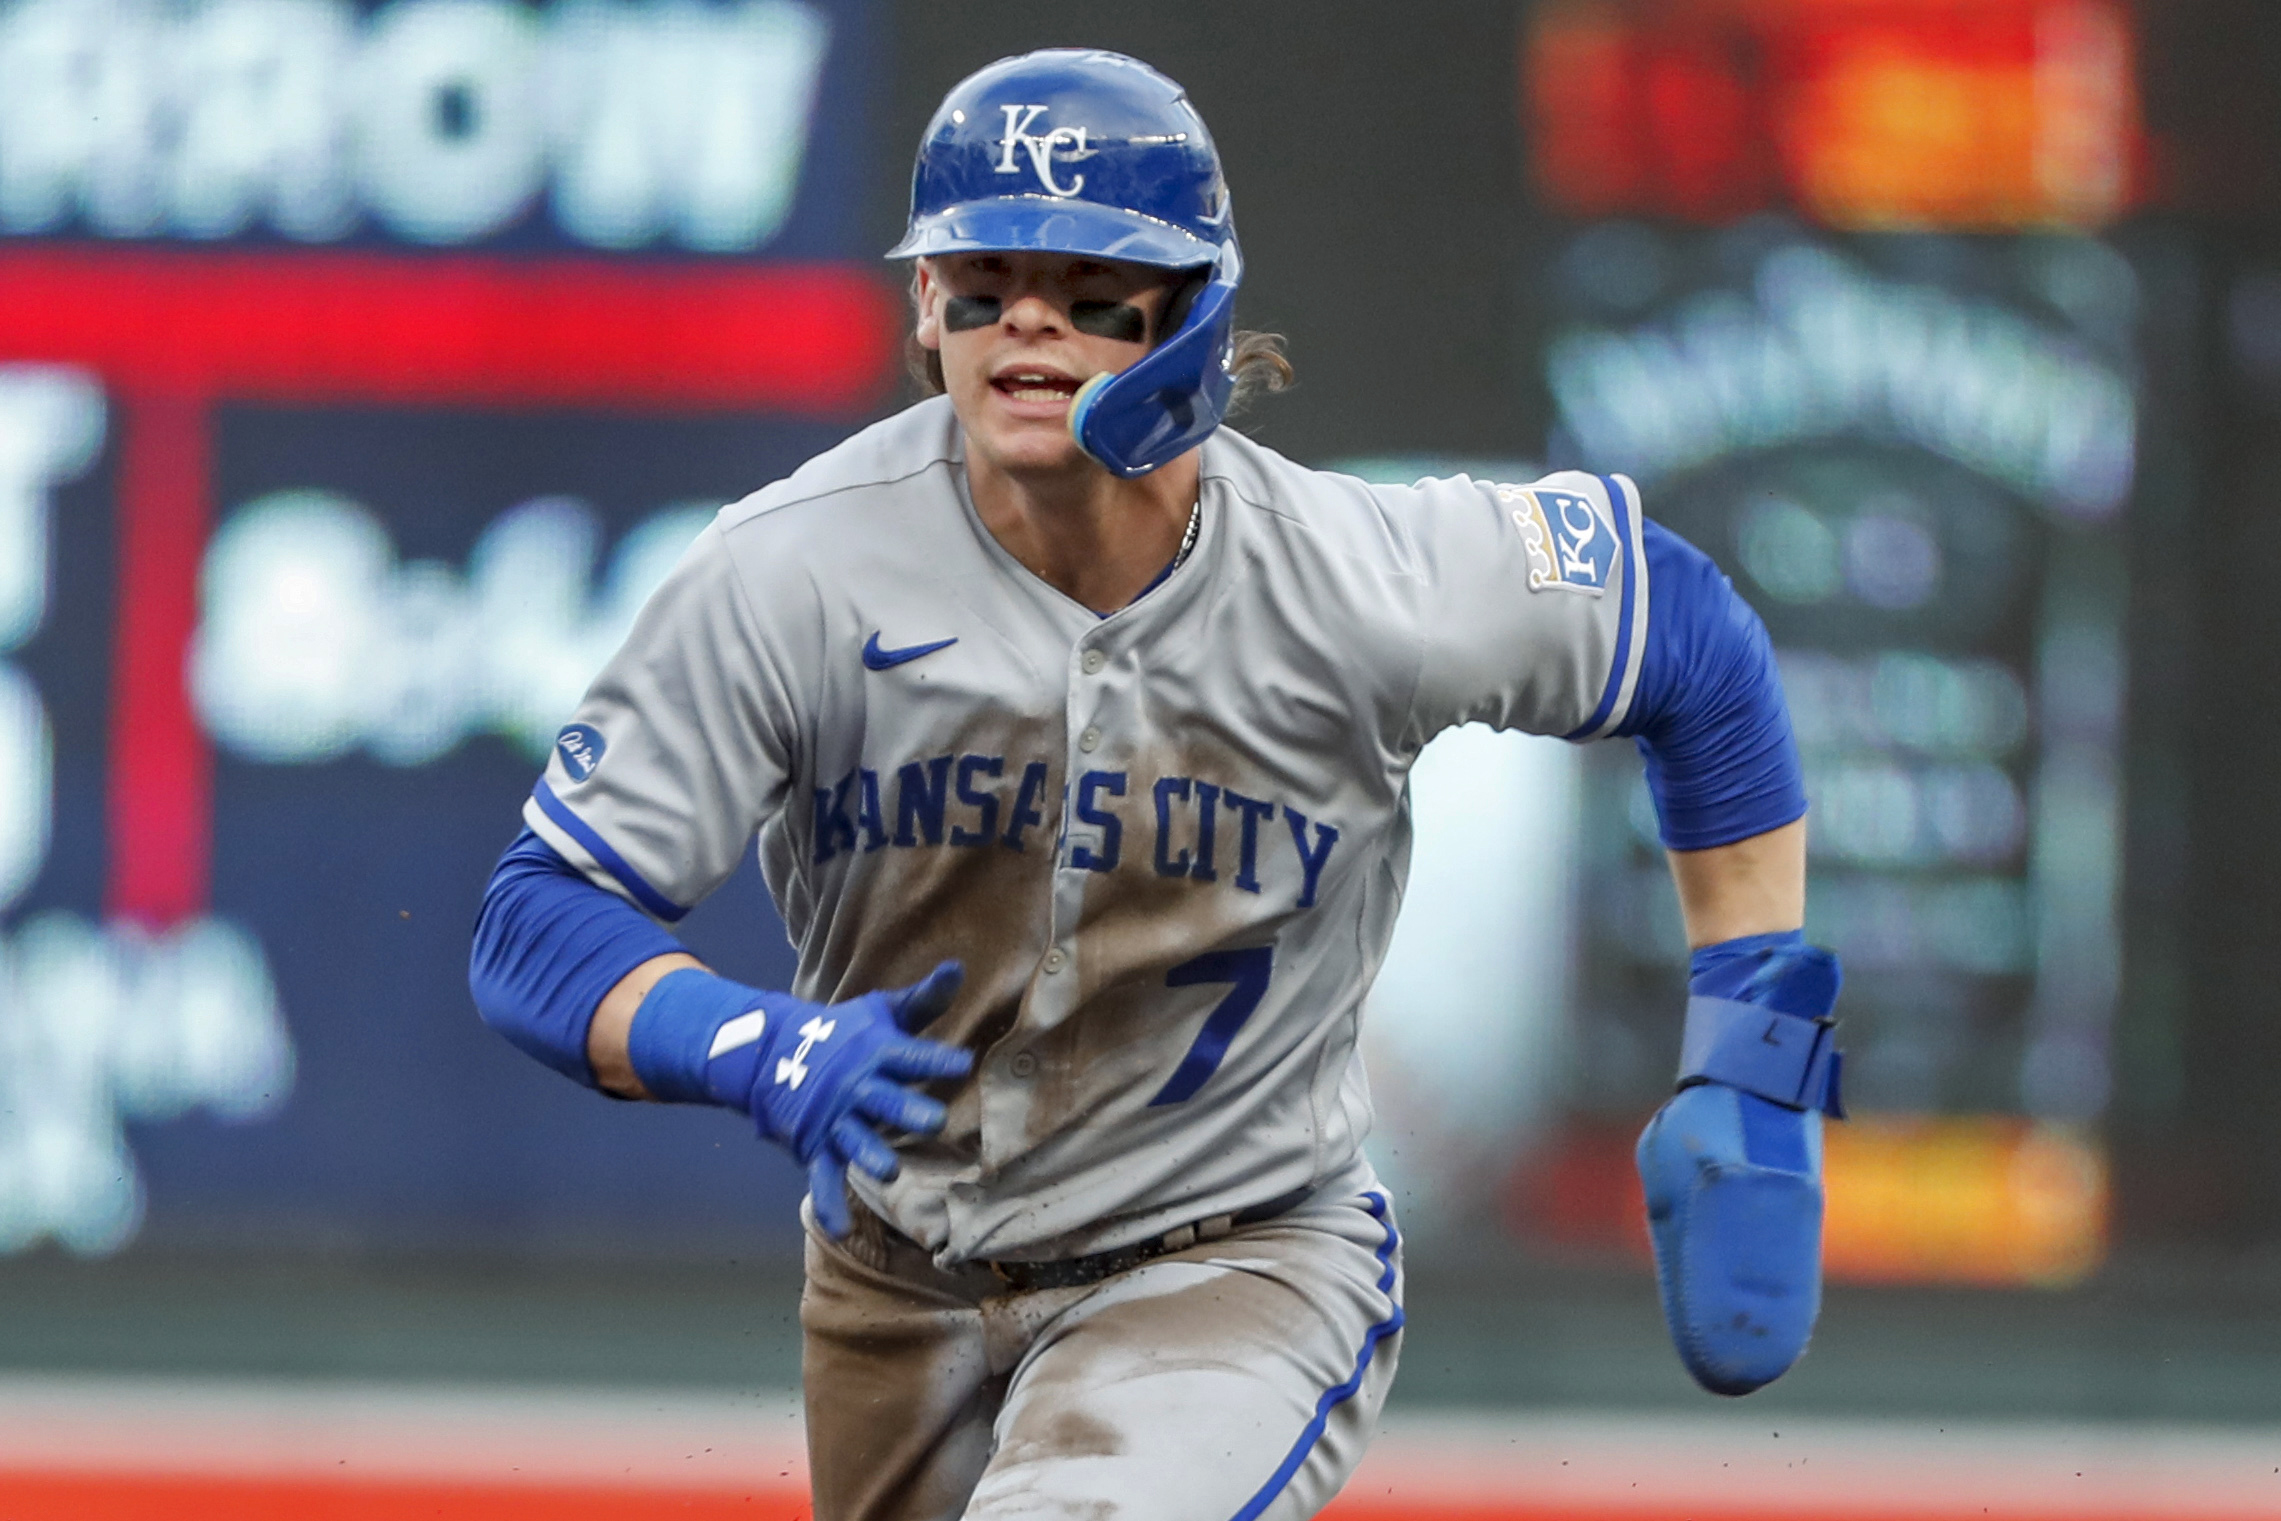 Top prospect Bobby Witt Jr. makes Royals' Opening Day roster - The